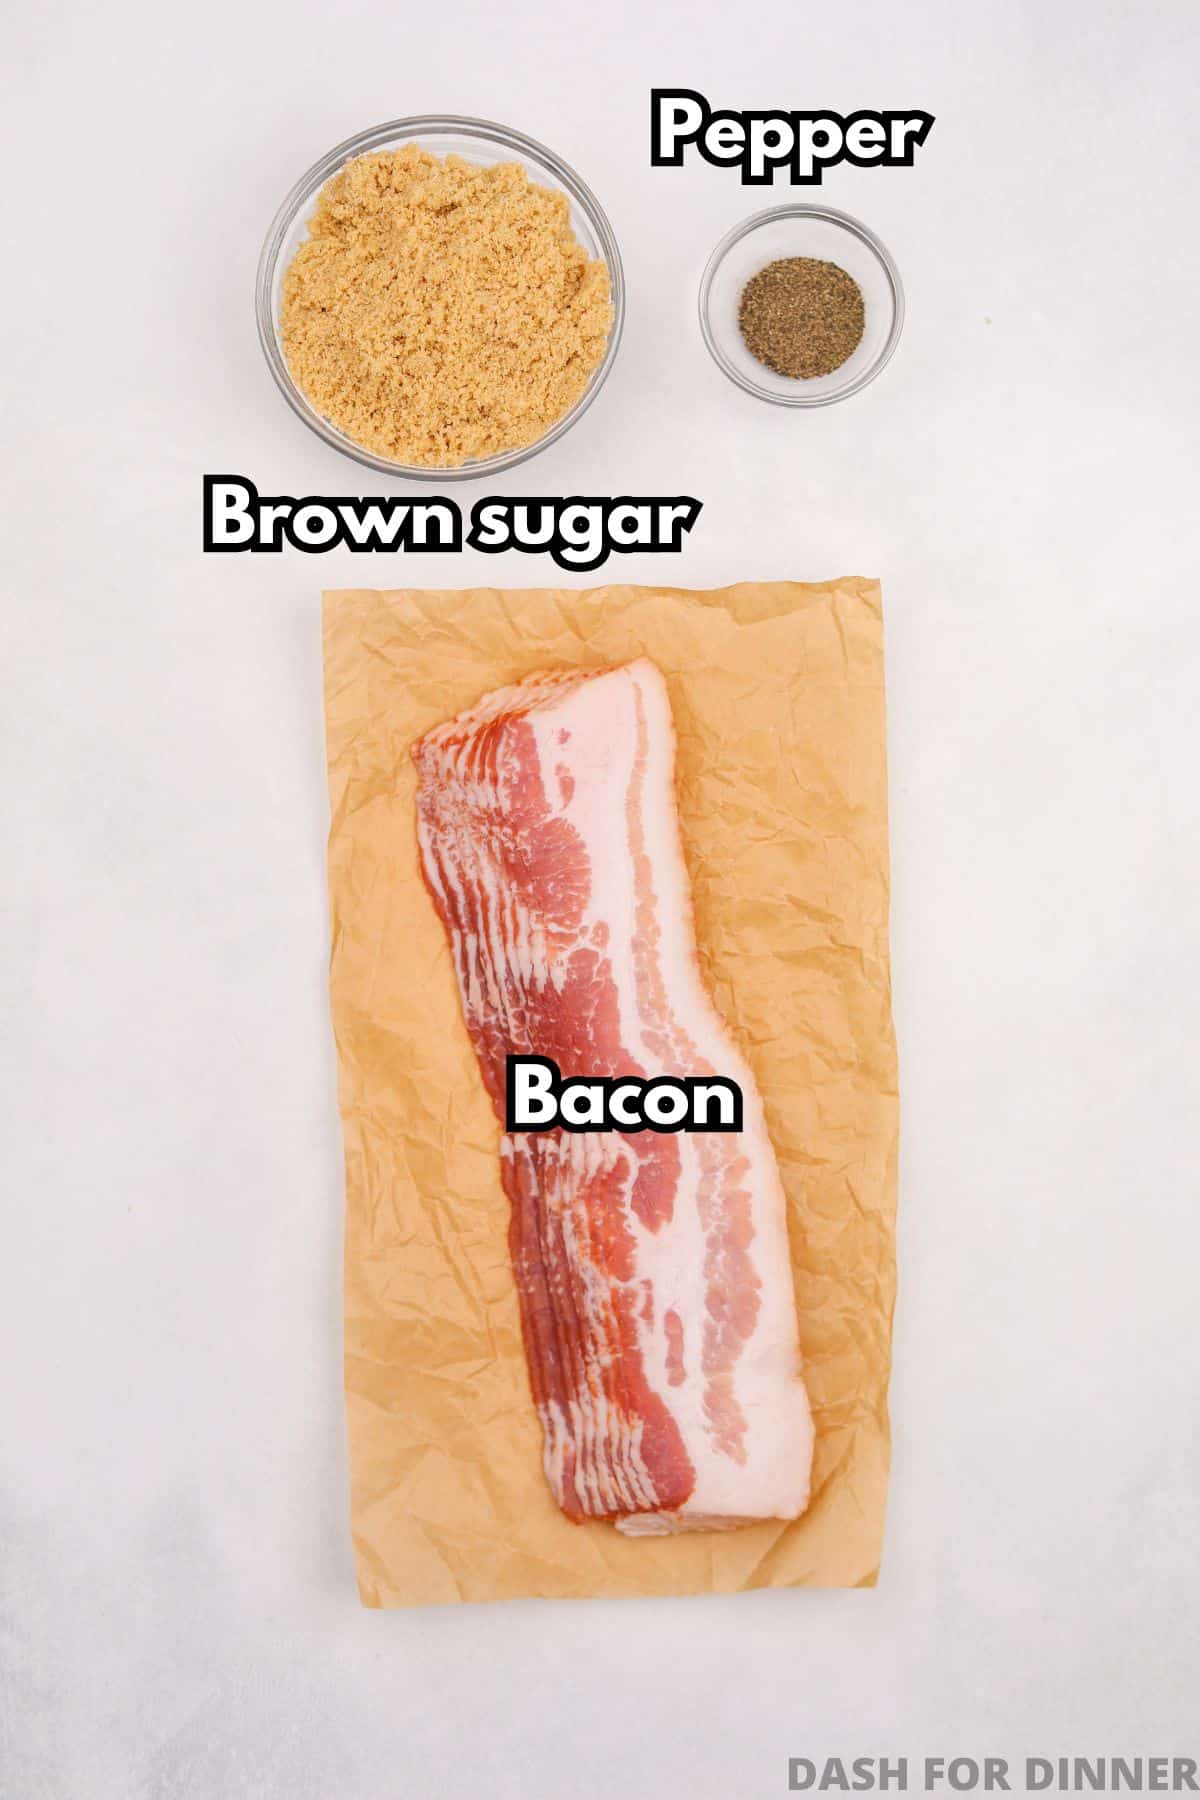 The ingredients needed to make candied bacon: brown sugar, pepper, and bacon.